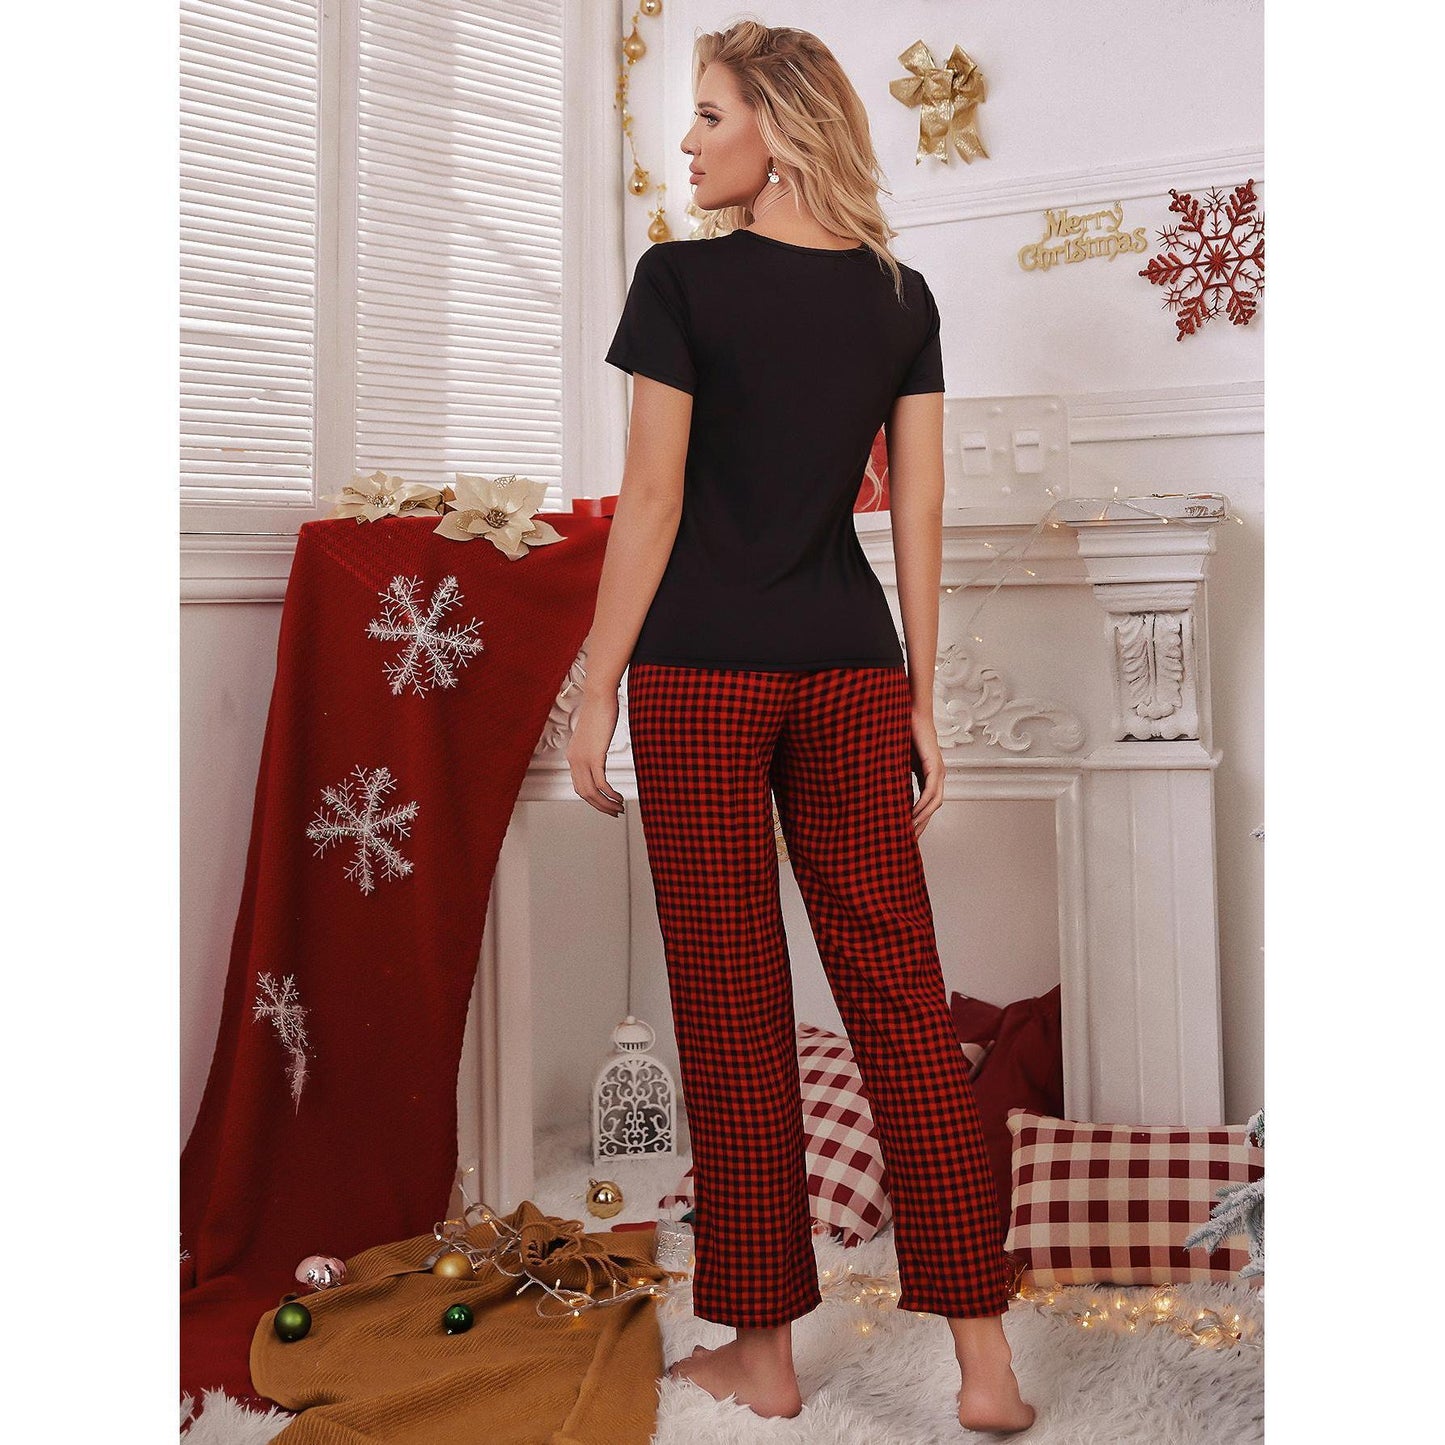 Home Wear  Christmas Atmosphere Short-Sleeved T-shirt Trousers Pajamas Suit Comfortable Can Be Worn outside